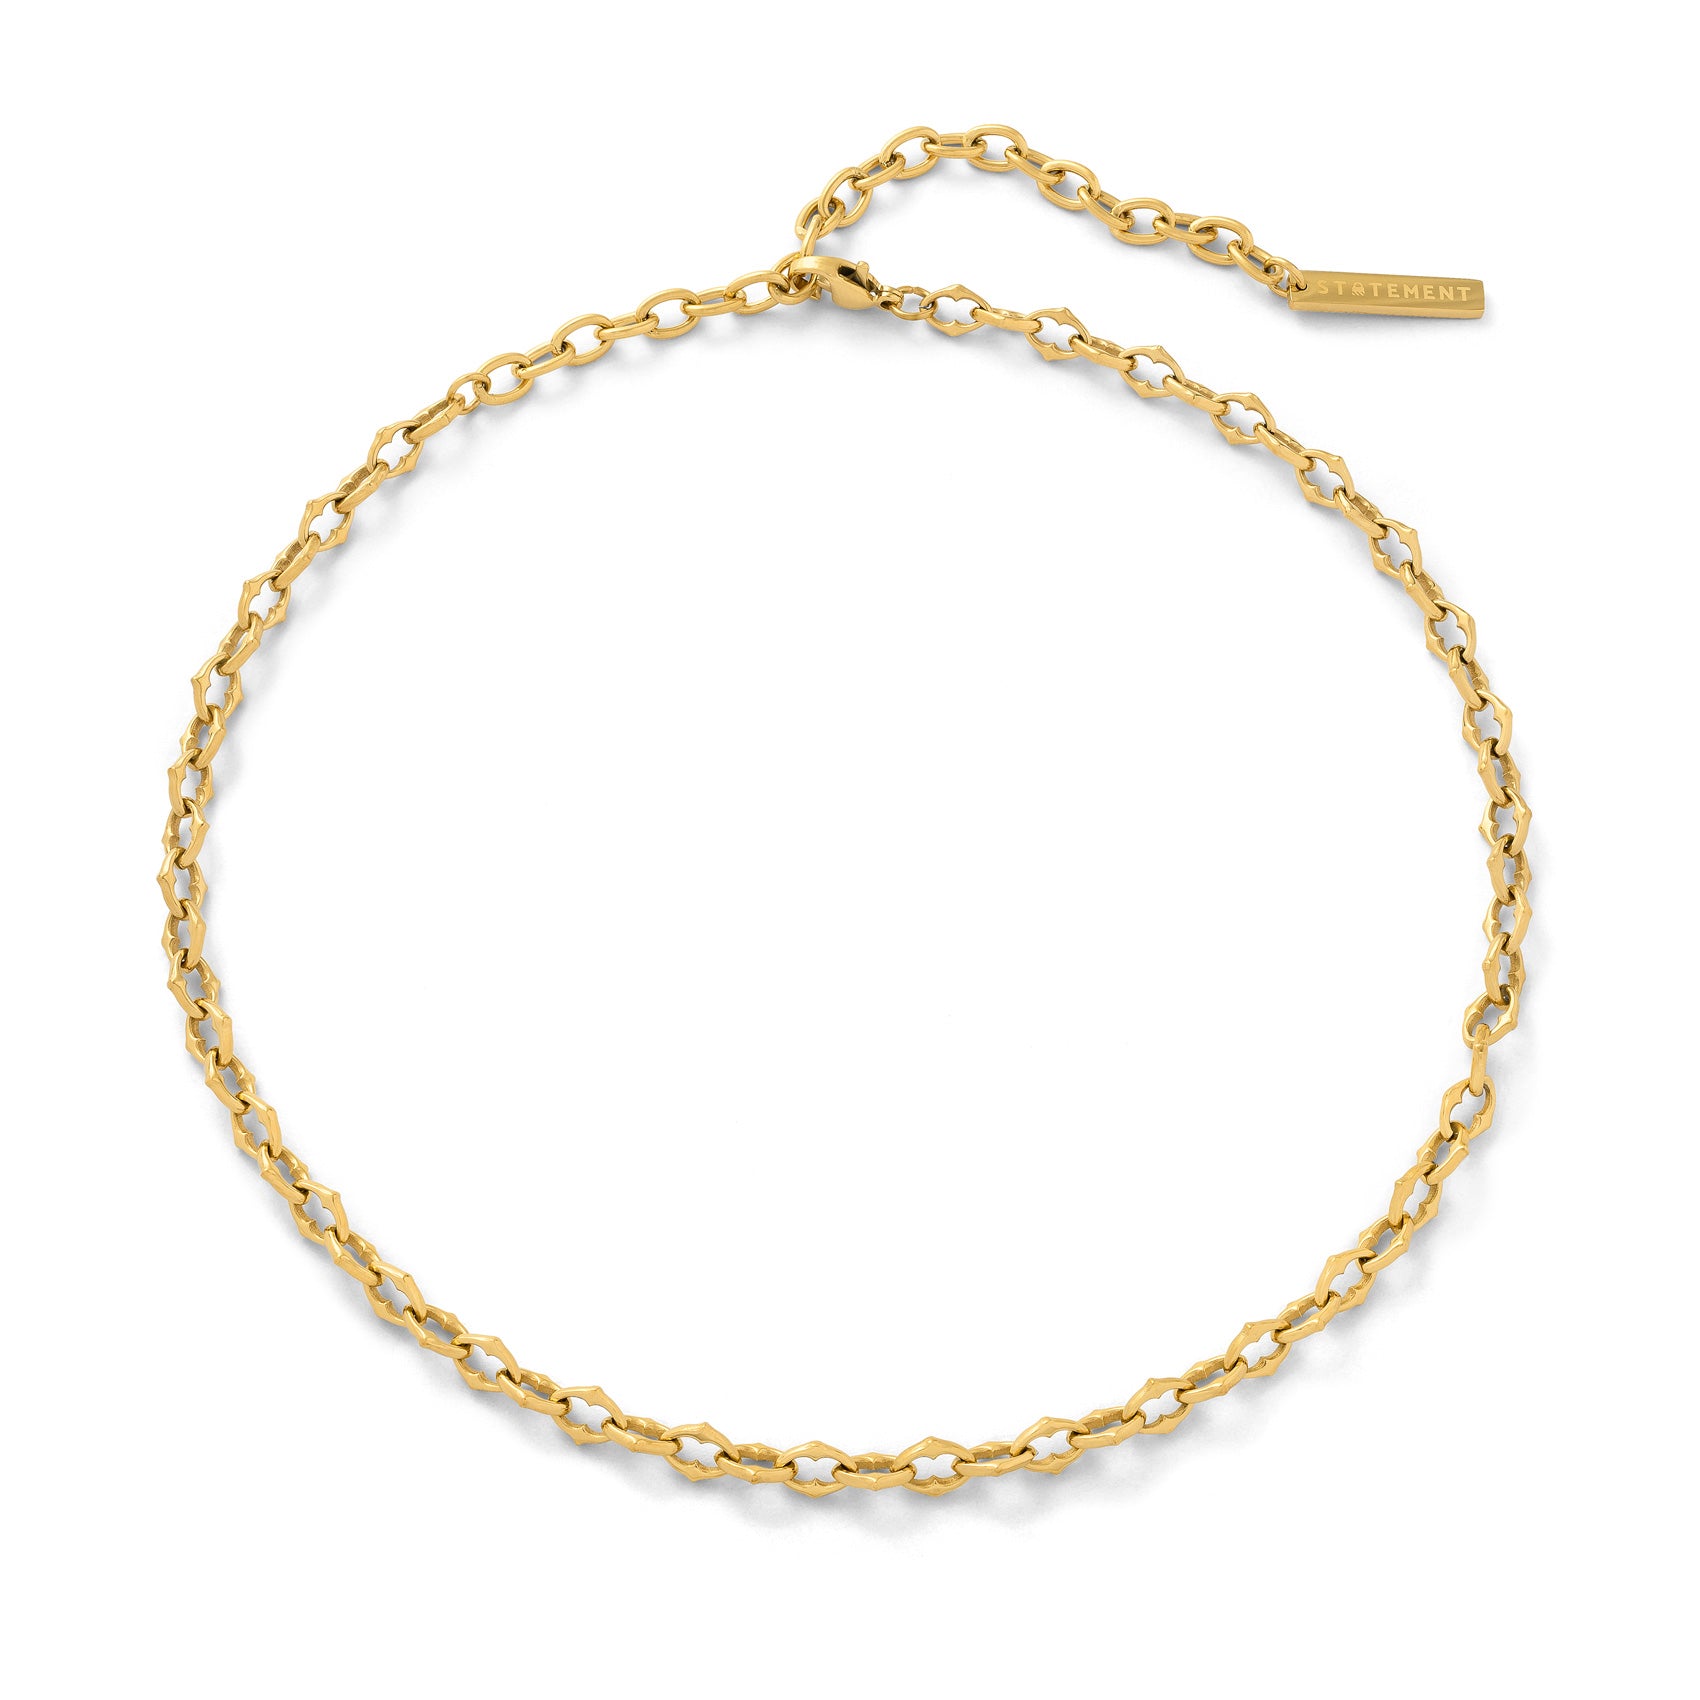 Spiked chain link necklace in gold